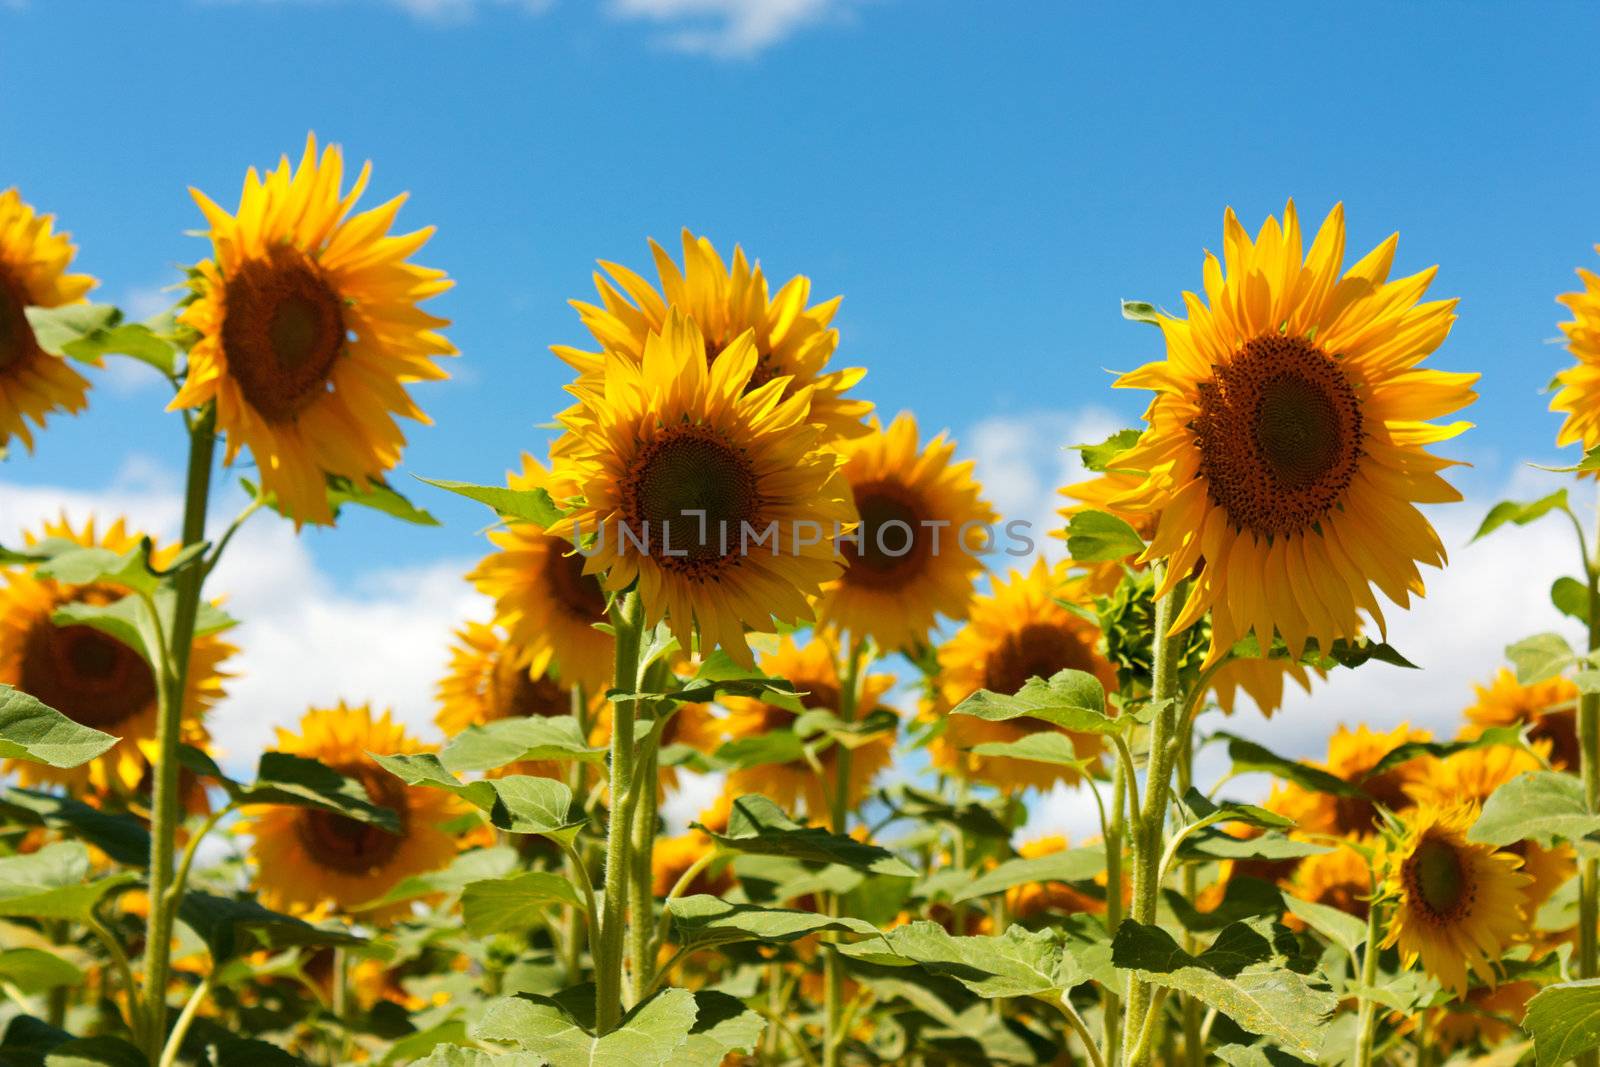 Sunflowers by TristanBM